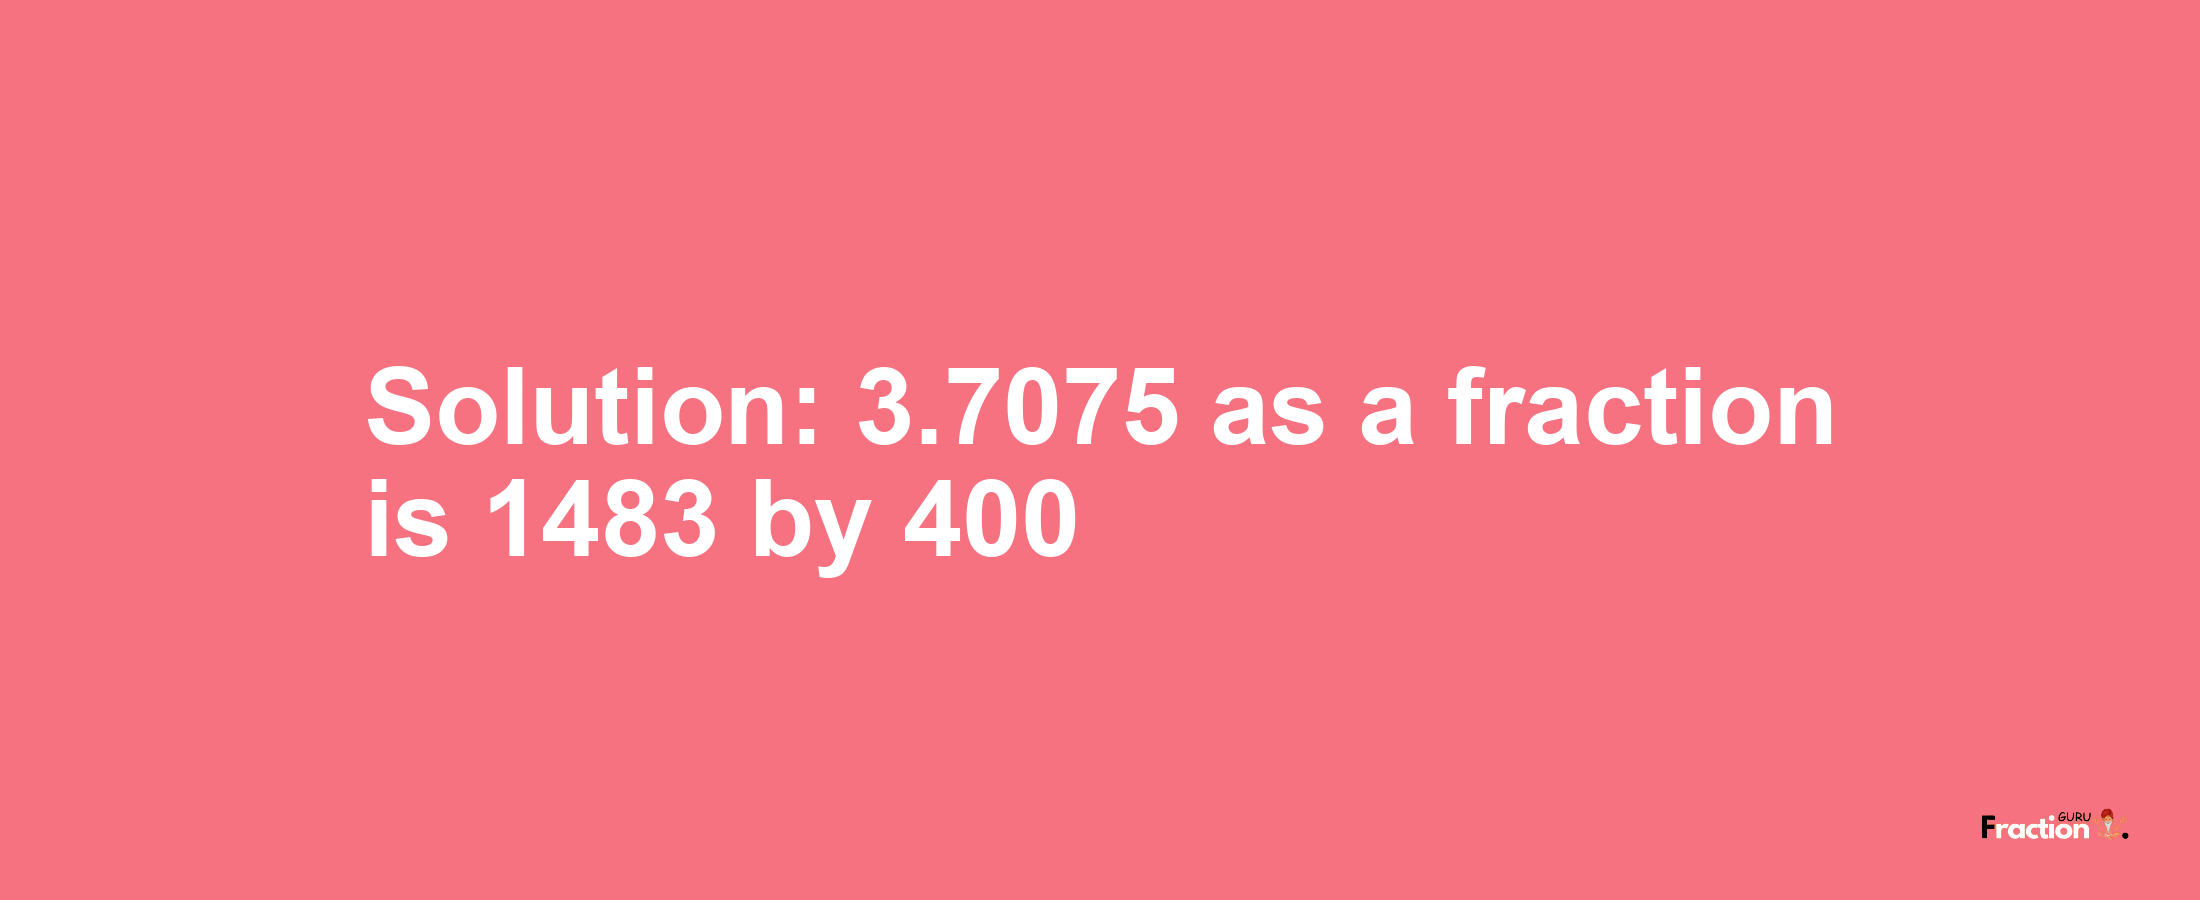 Solution:3.7075 as a fraction is 1483/400